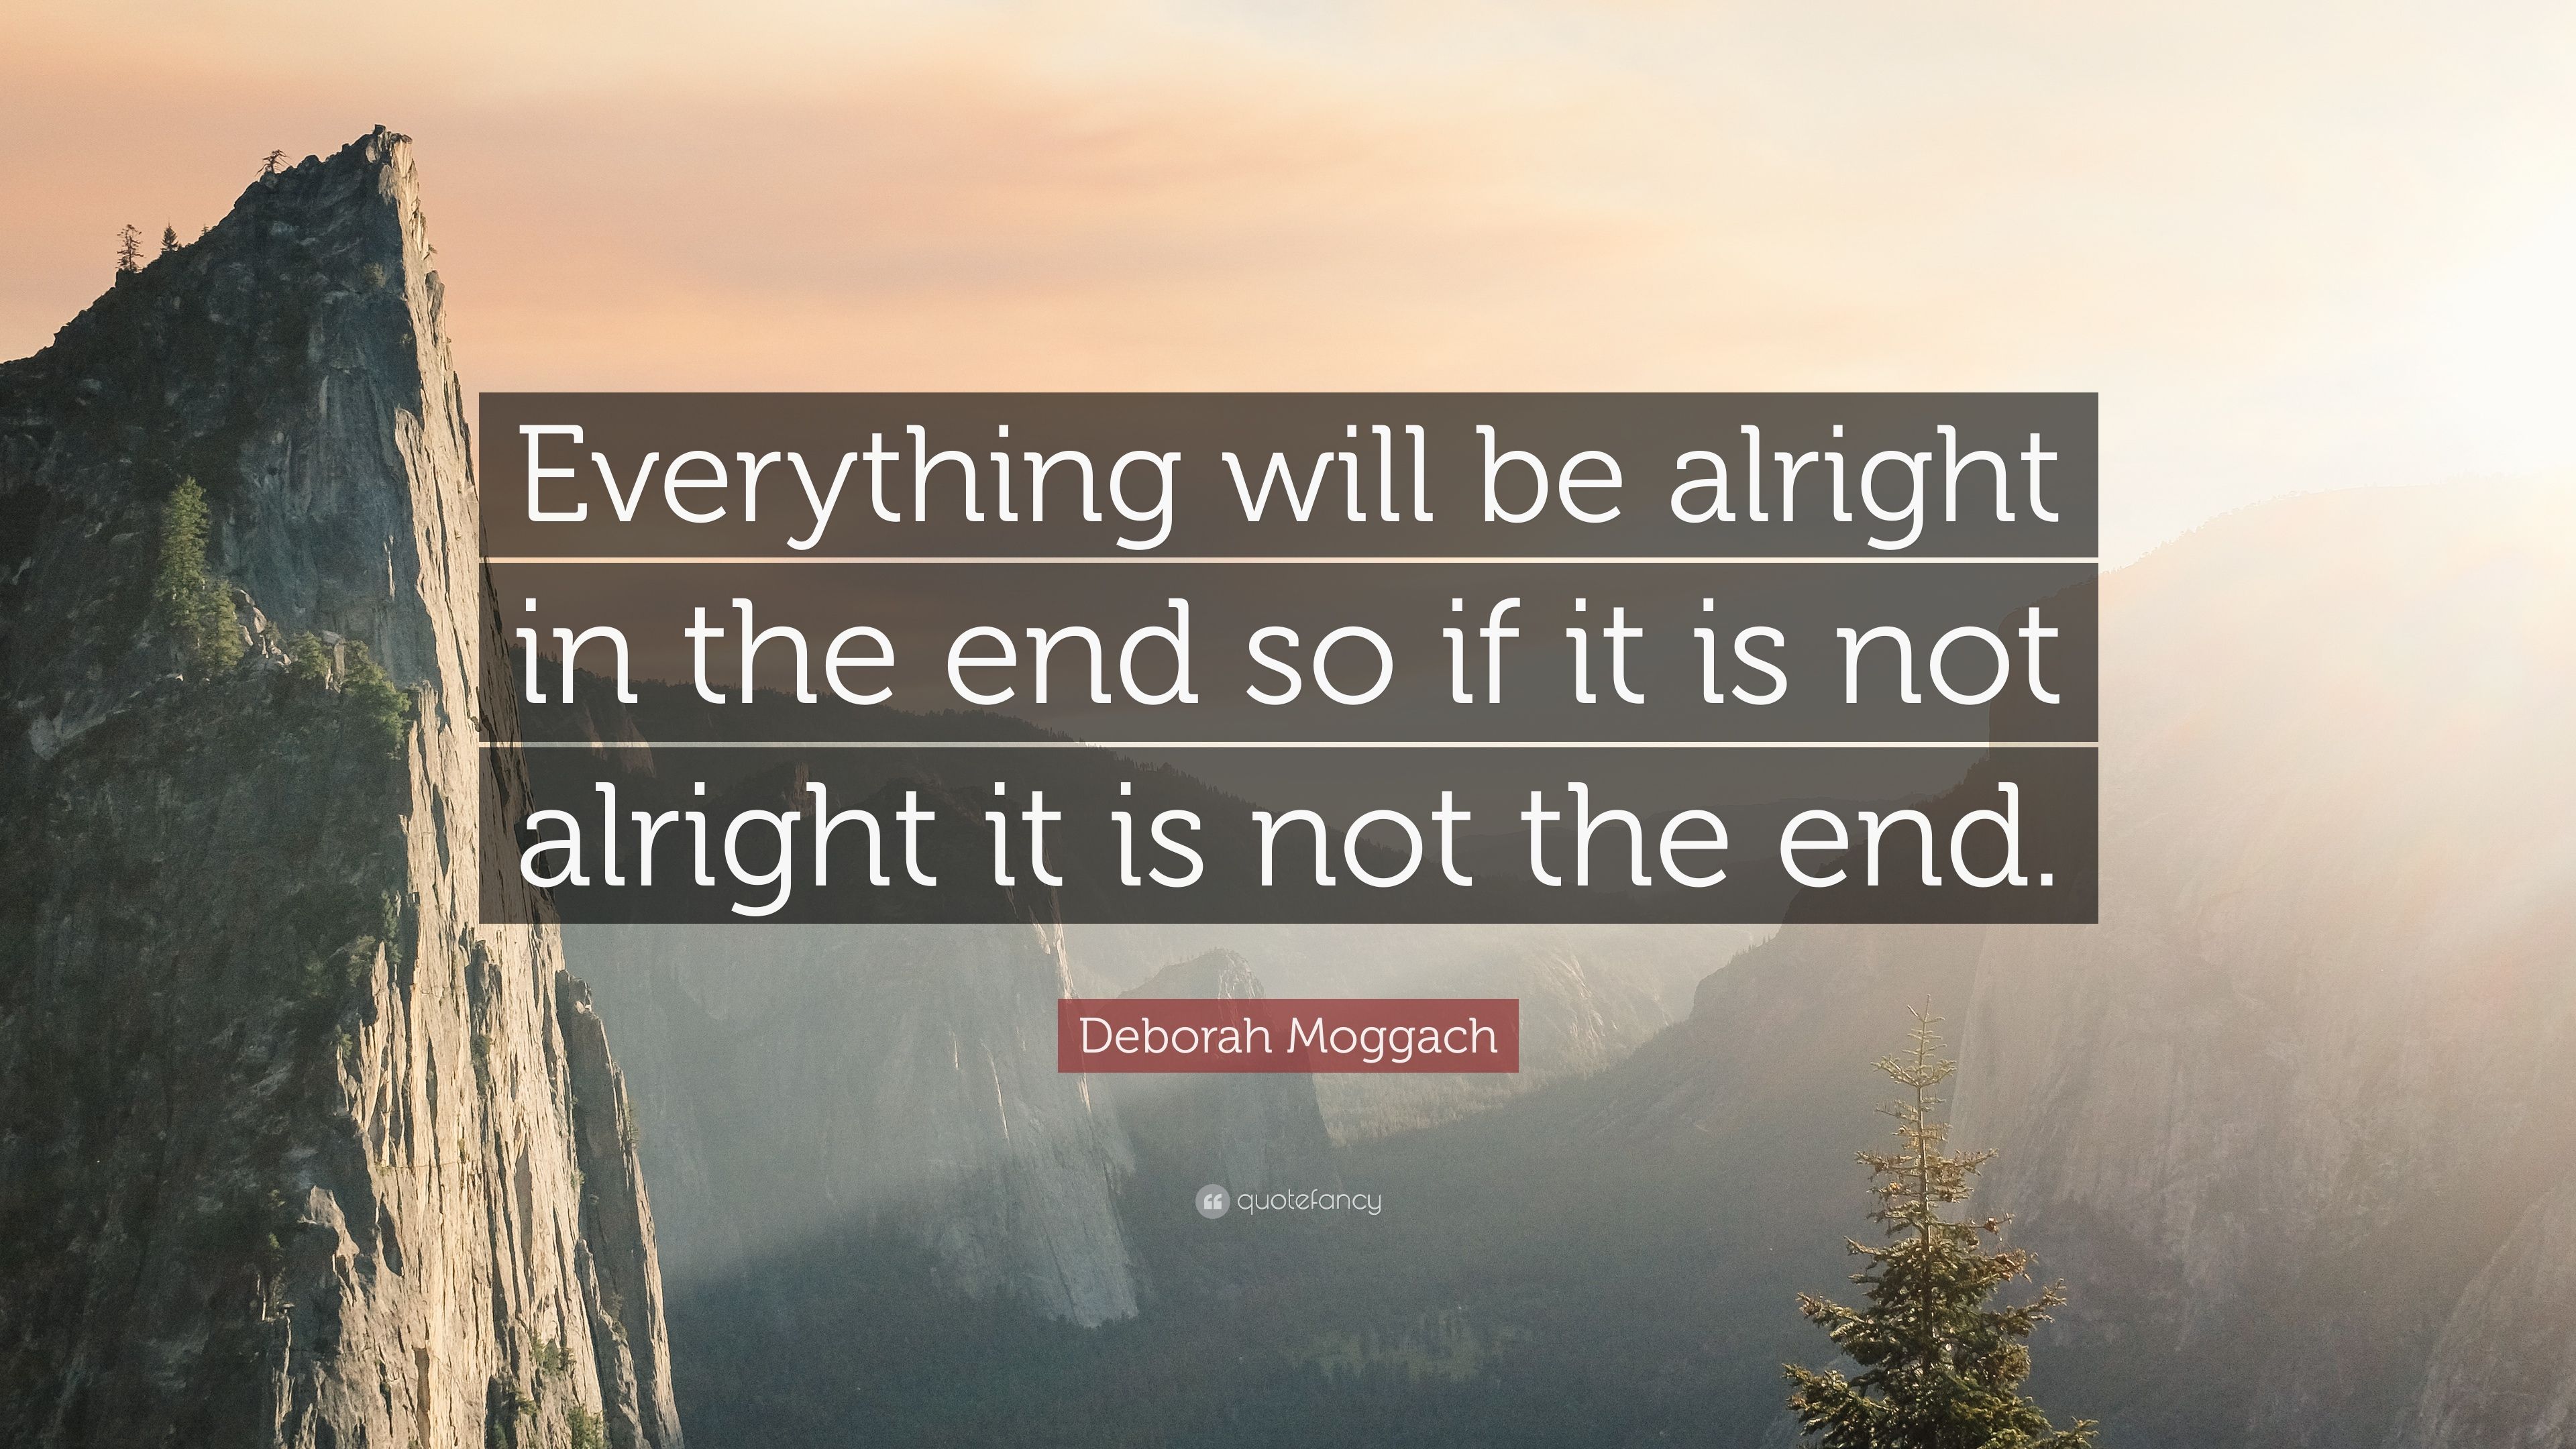 Deborah Moggach Quote: "Everything will be alright in the end so if it is not alright ...